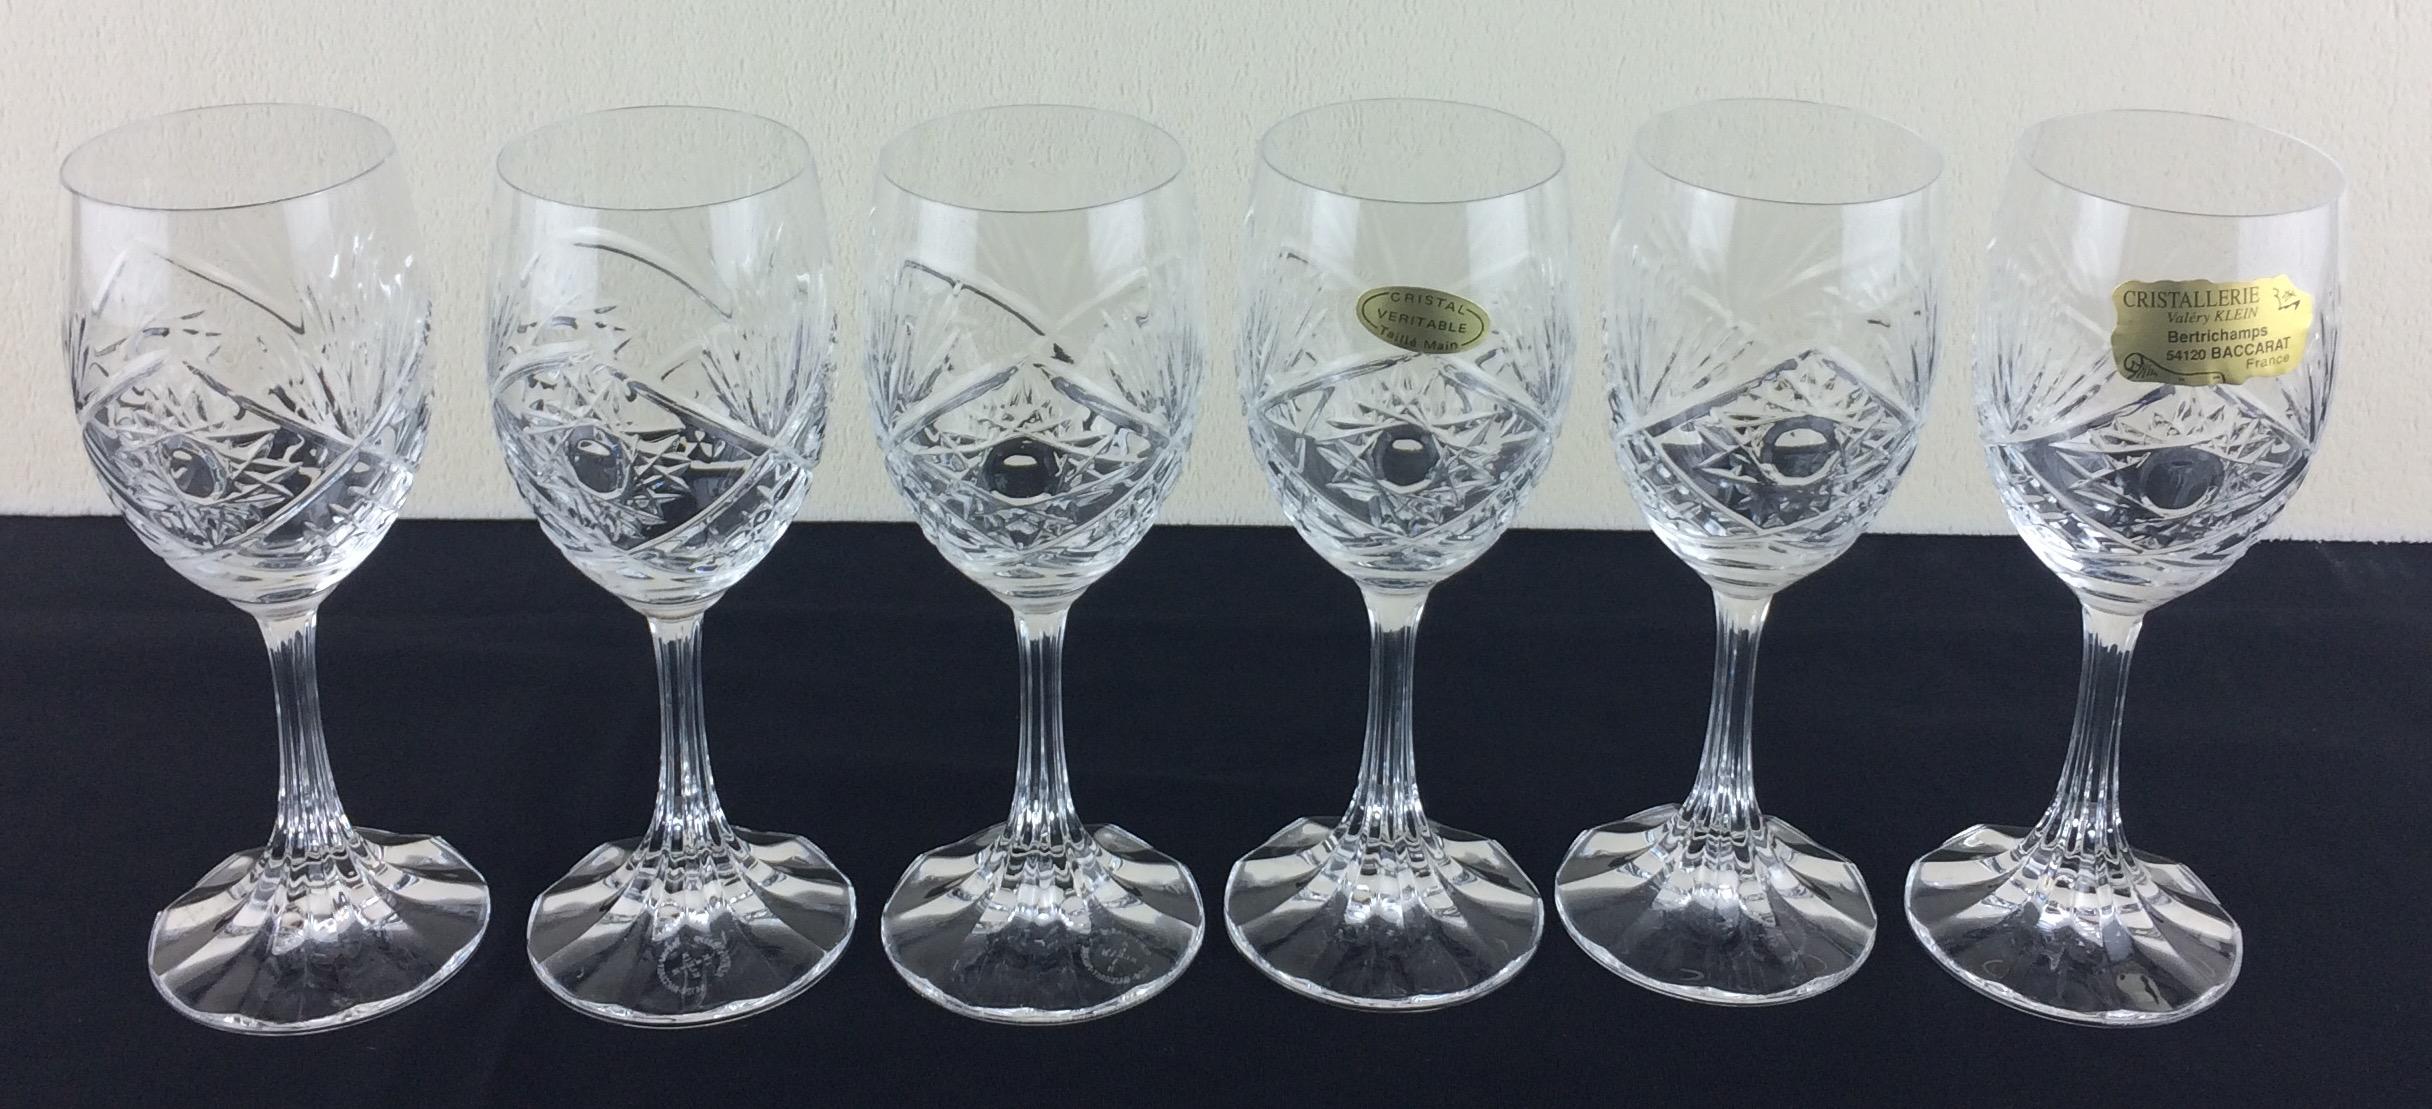 Hand-Crafted Stunning Set of Baccarat Crystal Wine, Water Glasses, Champagne Flutes & Bucket